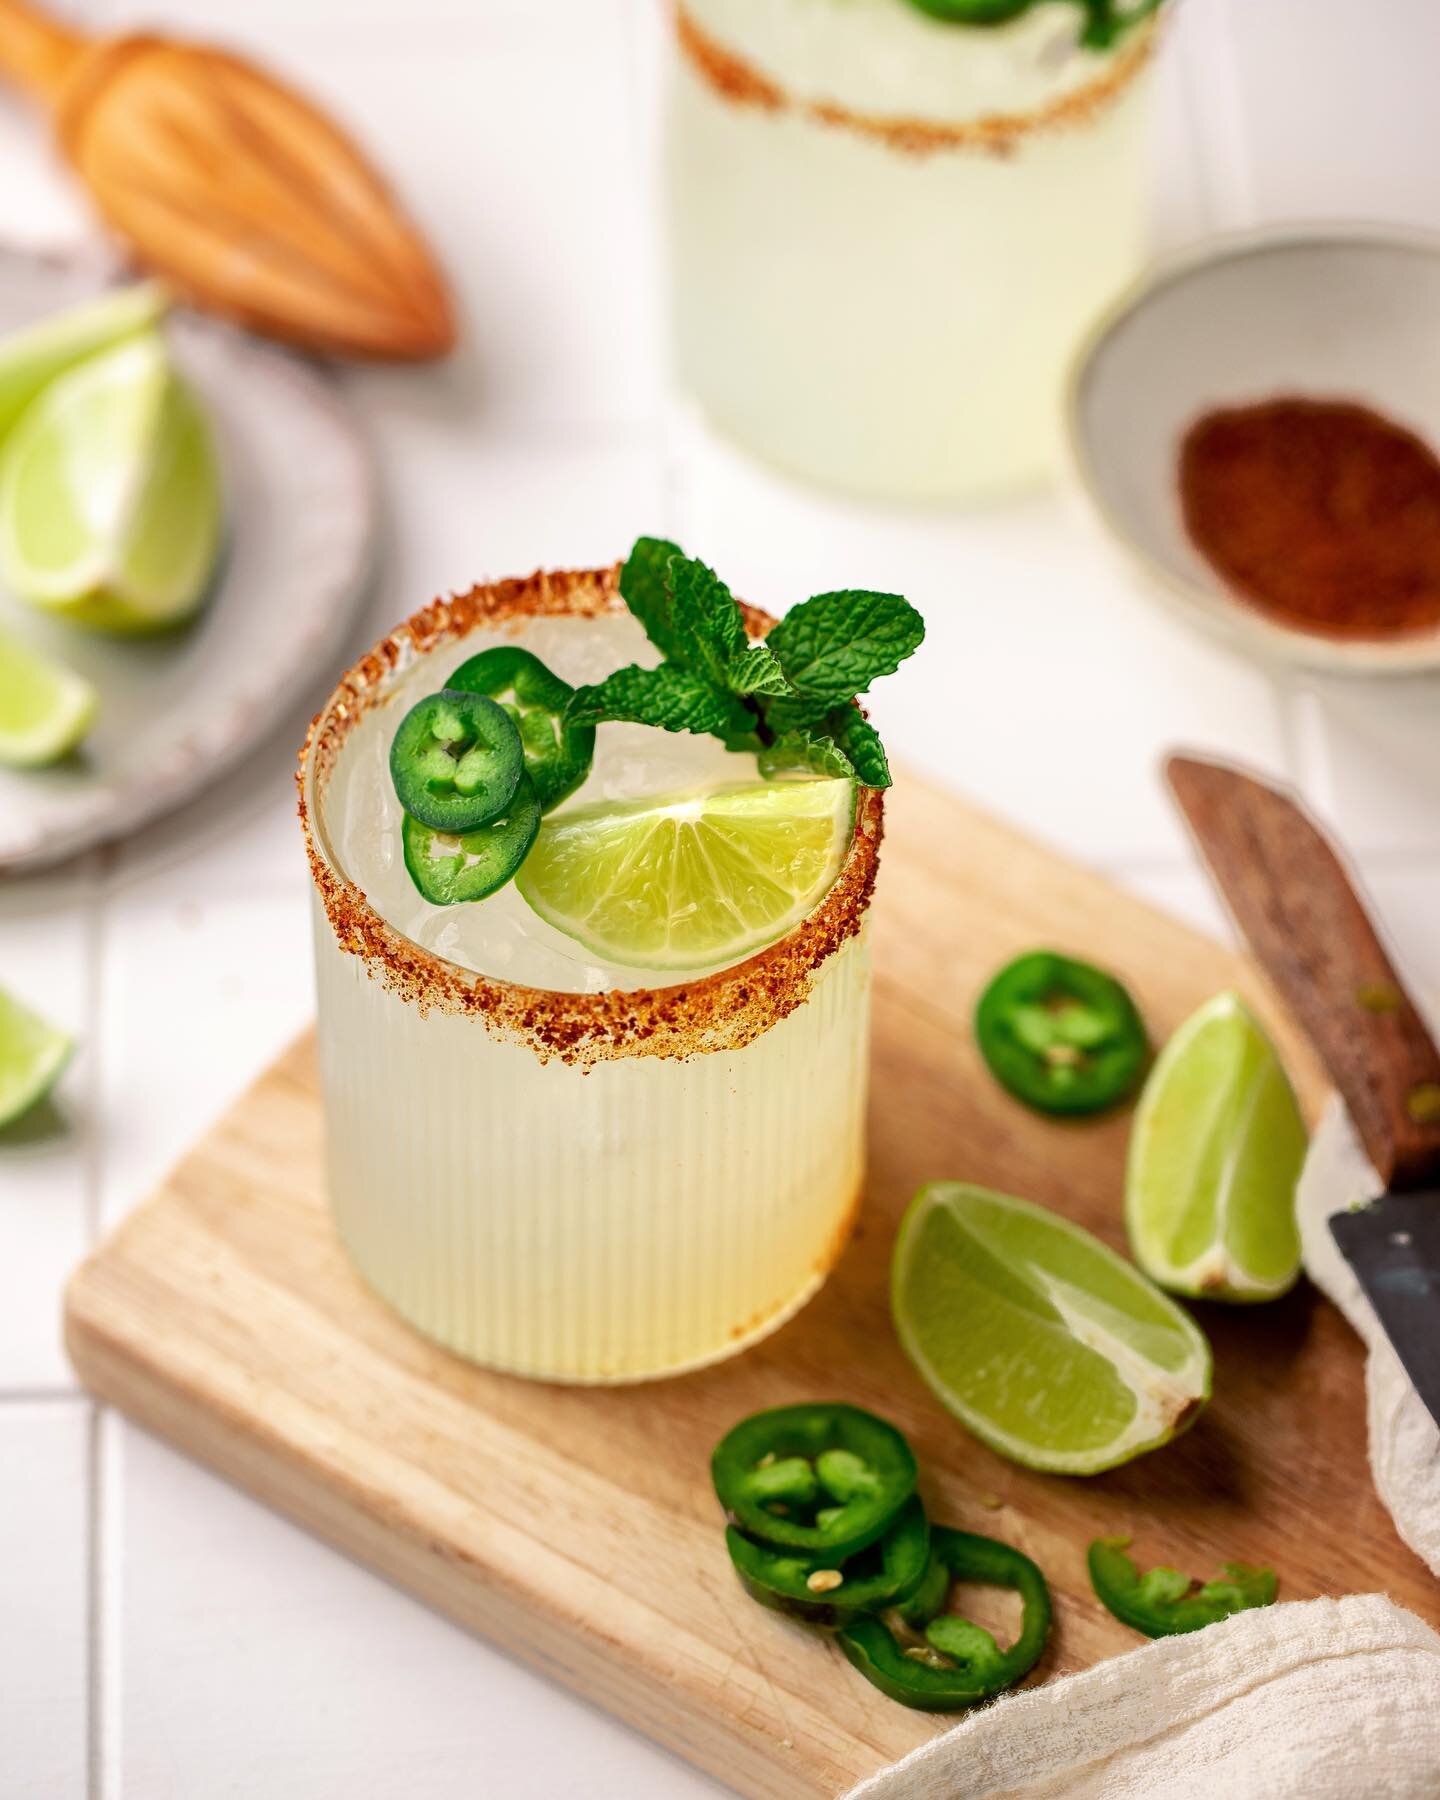 I&rsquo;ve decided that margarita wednesdays are officially a thing 🍹

#drinkphotography #cocktailphotography #drinkphoto #cocktailhour #foodphotographer #foodtography